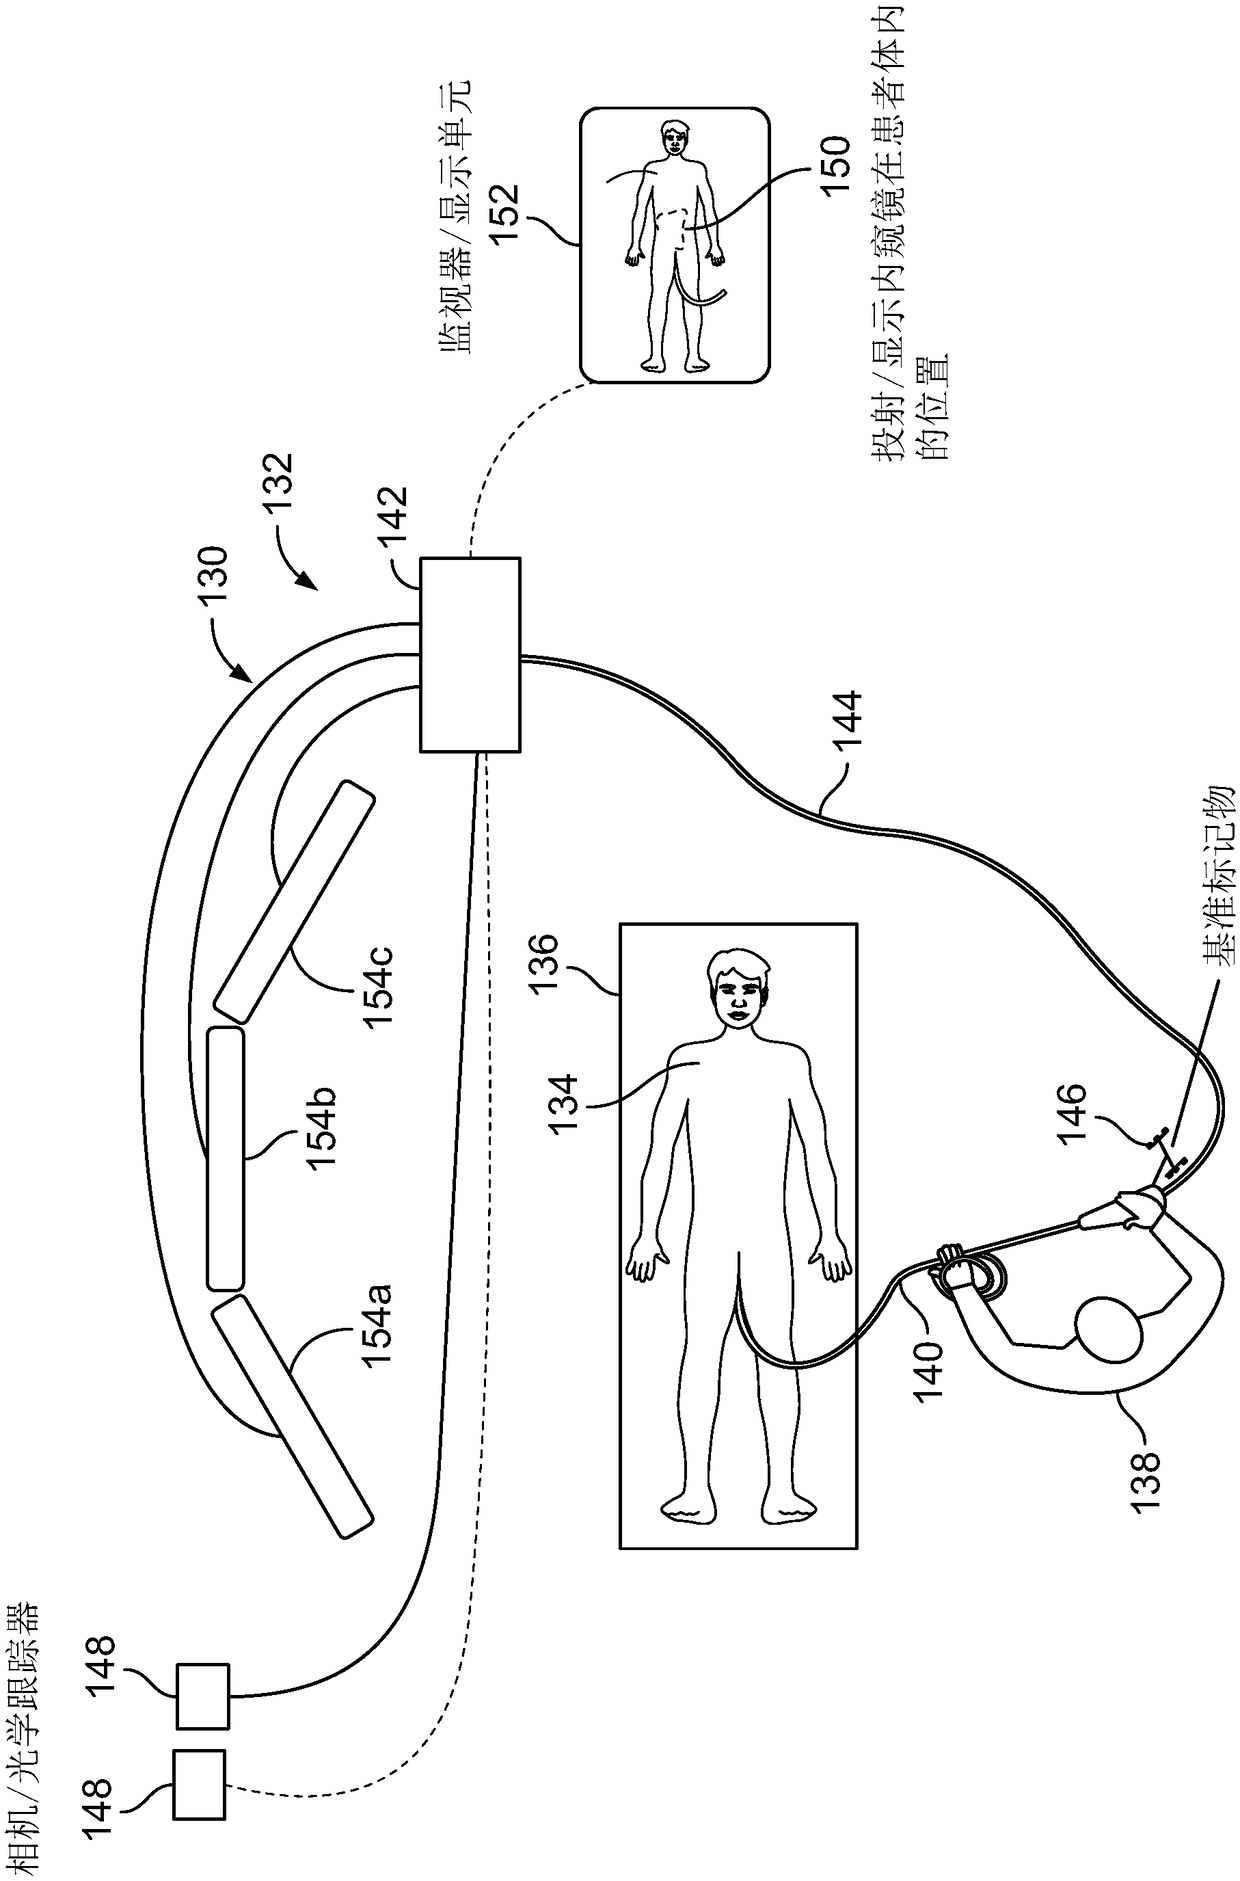 Device and method for tracking the position of an endoscope within a patient's body